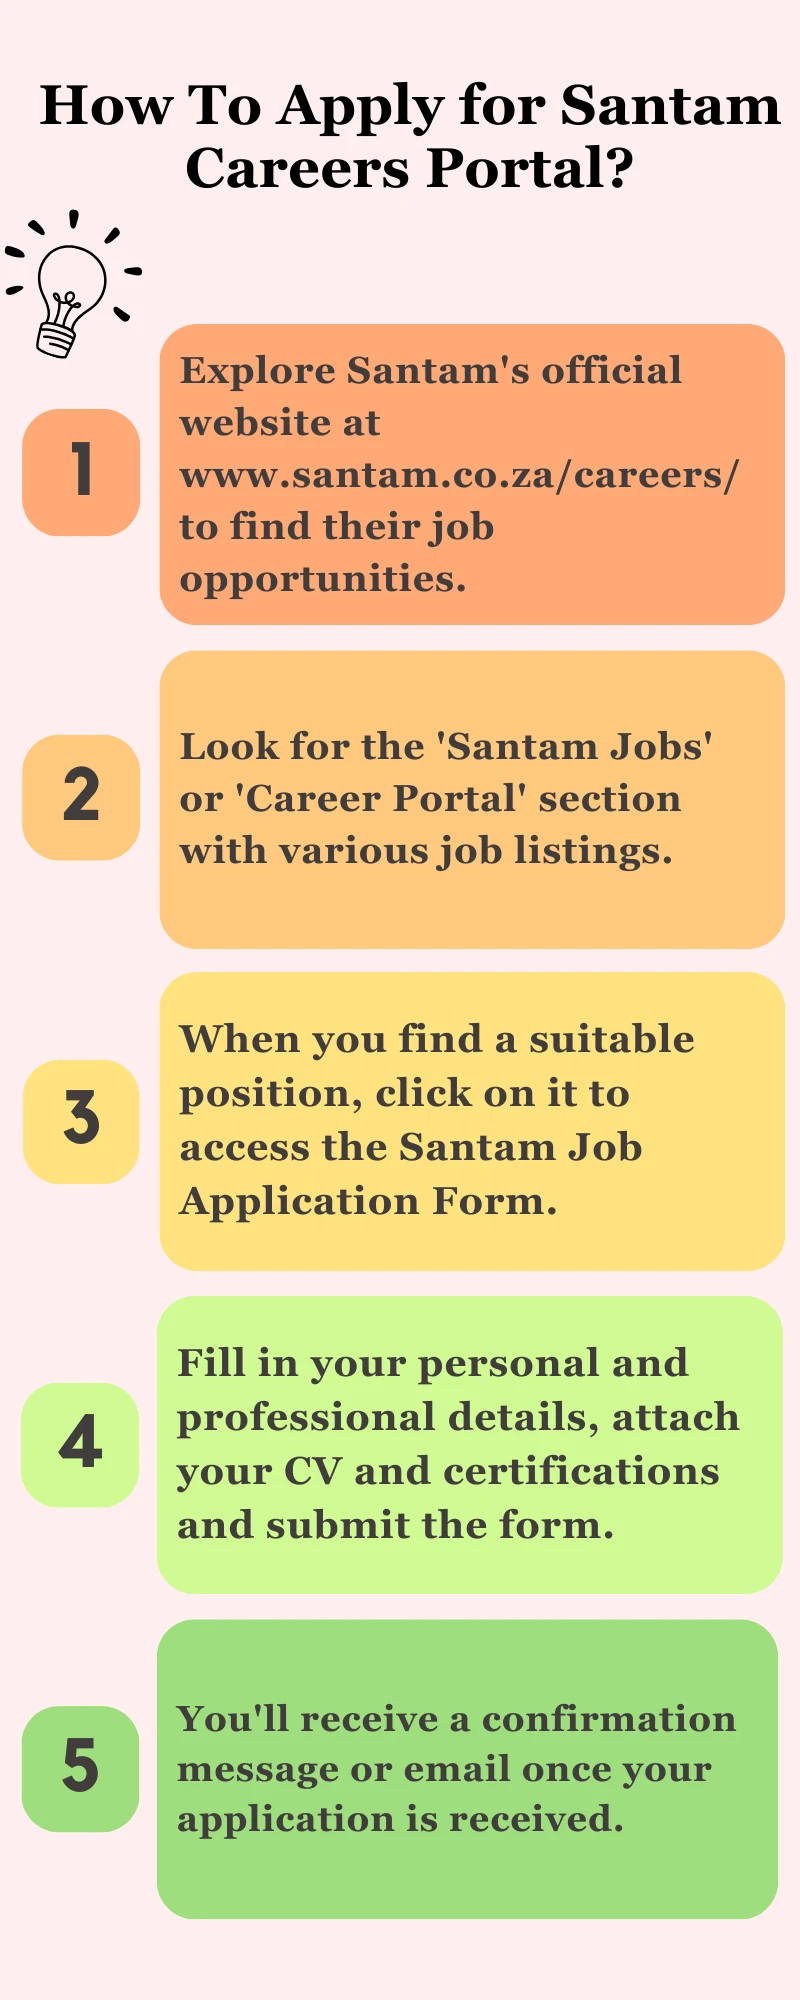 How To Apply for Santam Careers Portal?